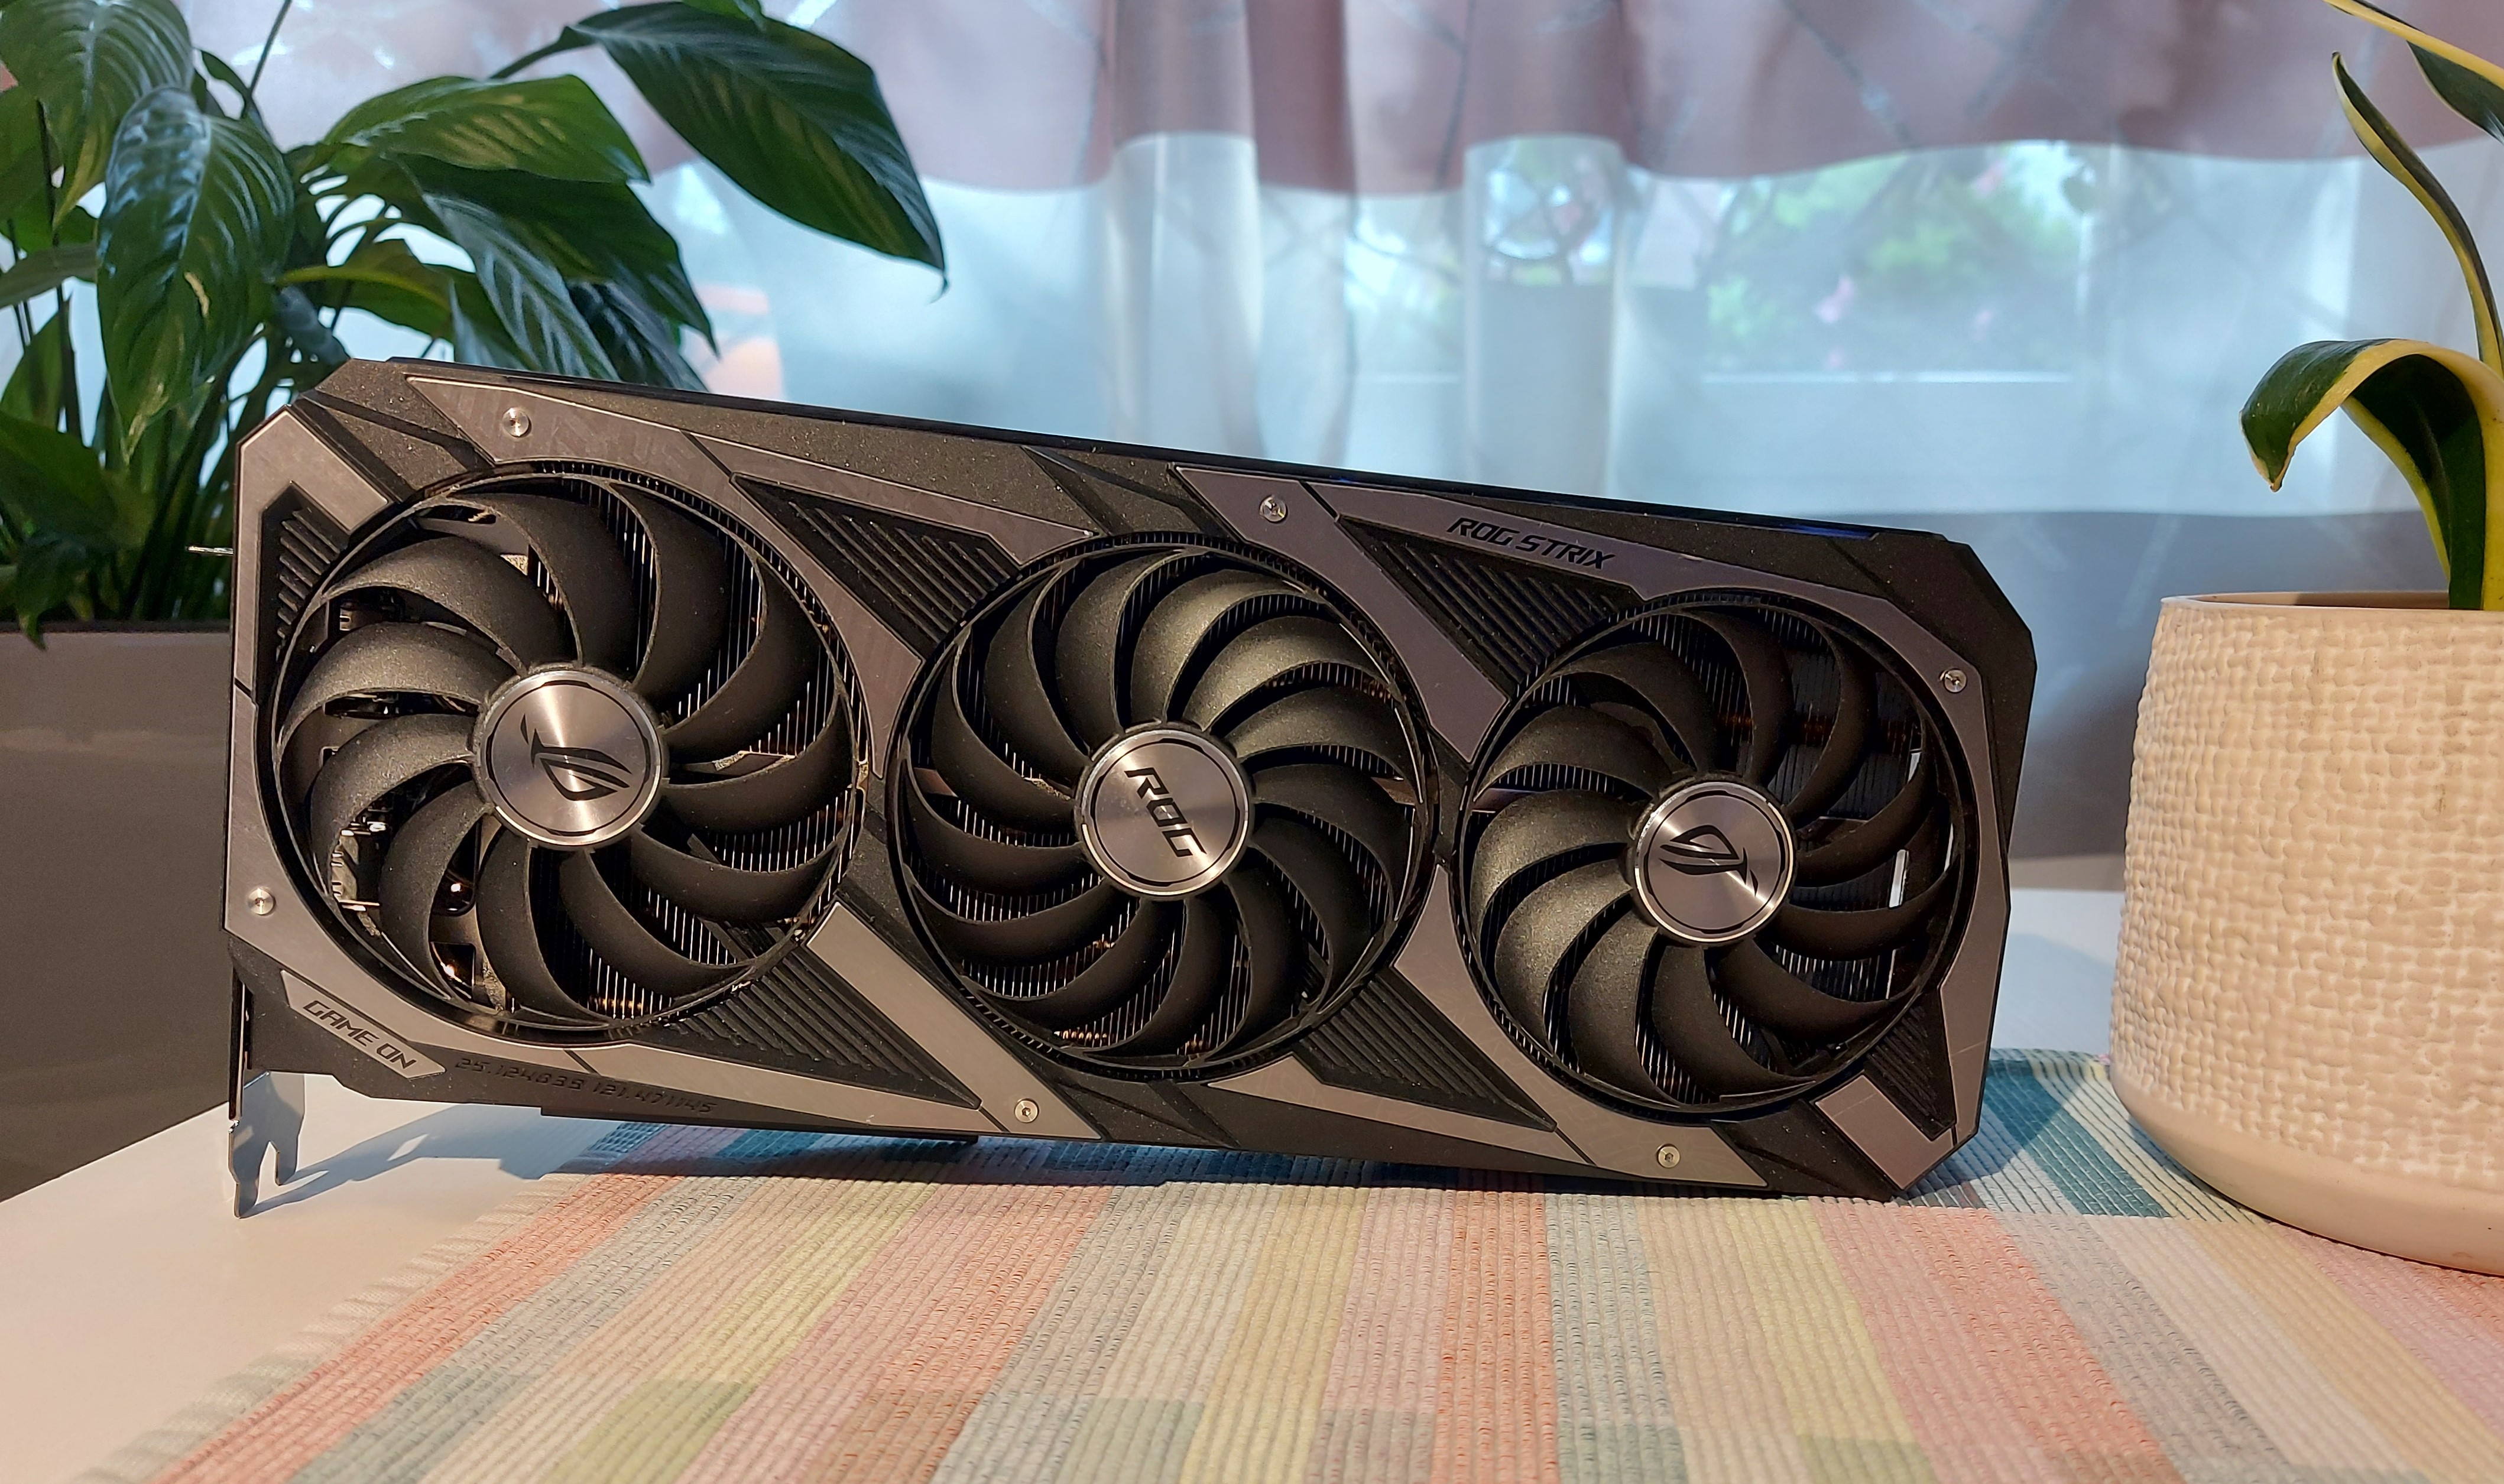 CapFrameX - RTX high-end by ASUS with massive cooler - Blog